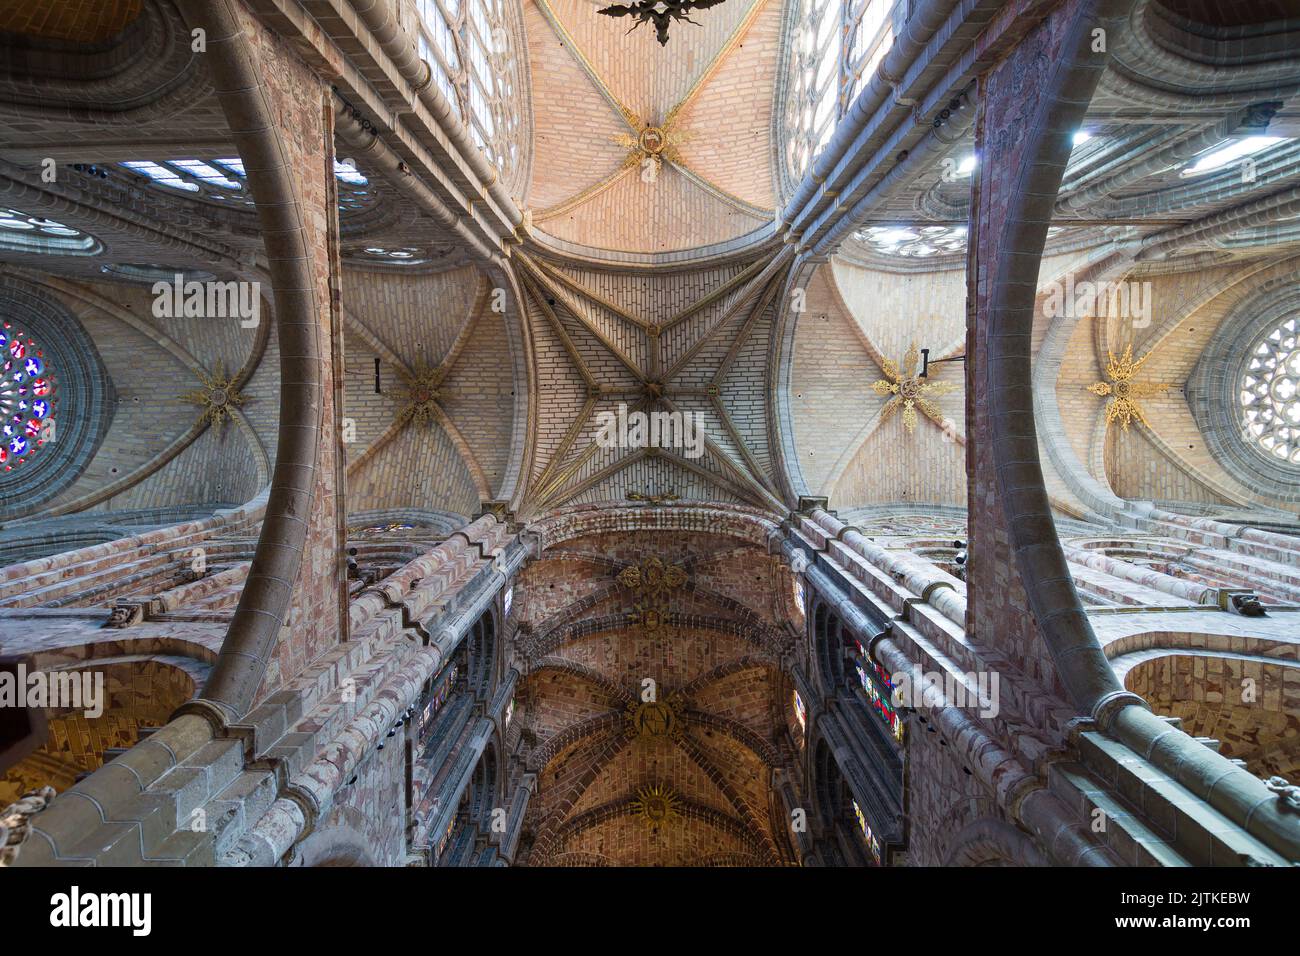 Ceiling ot the Cathedral of Avila, Spain. Stock Photo